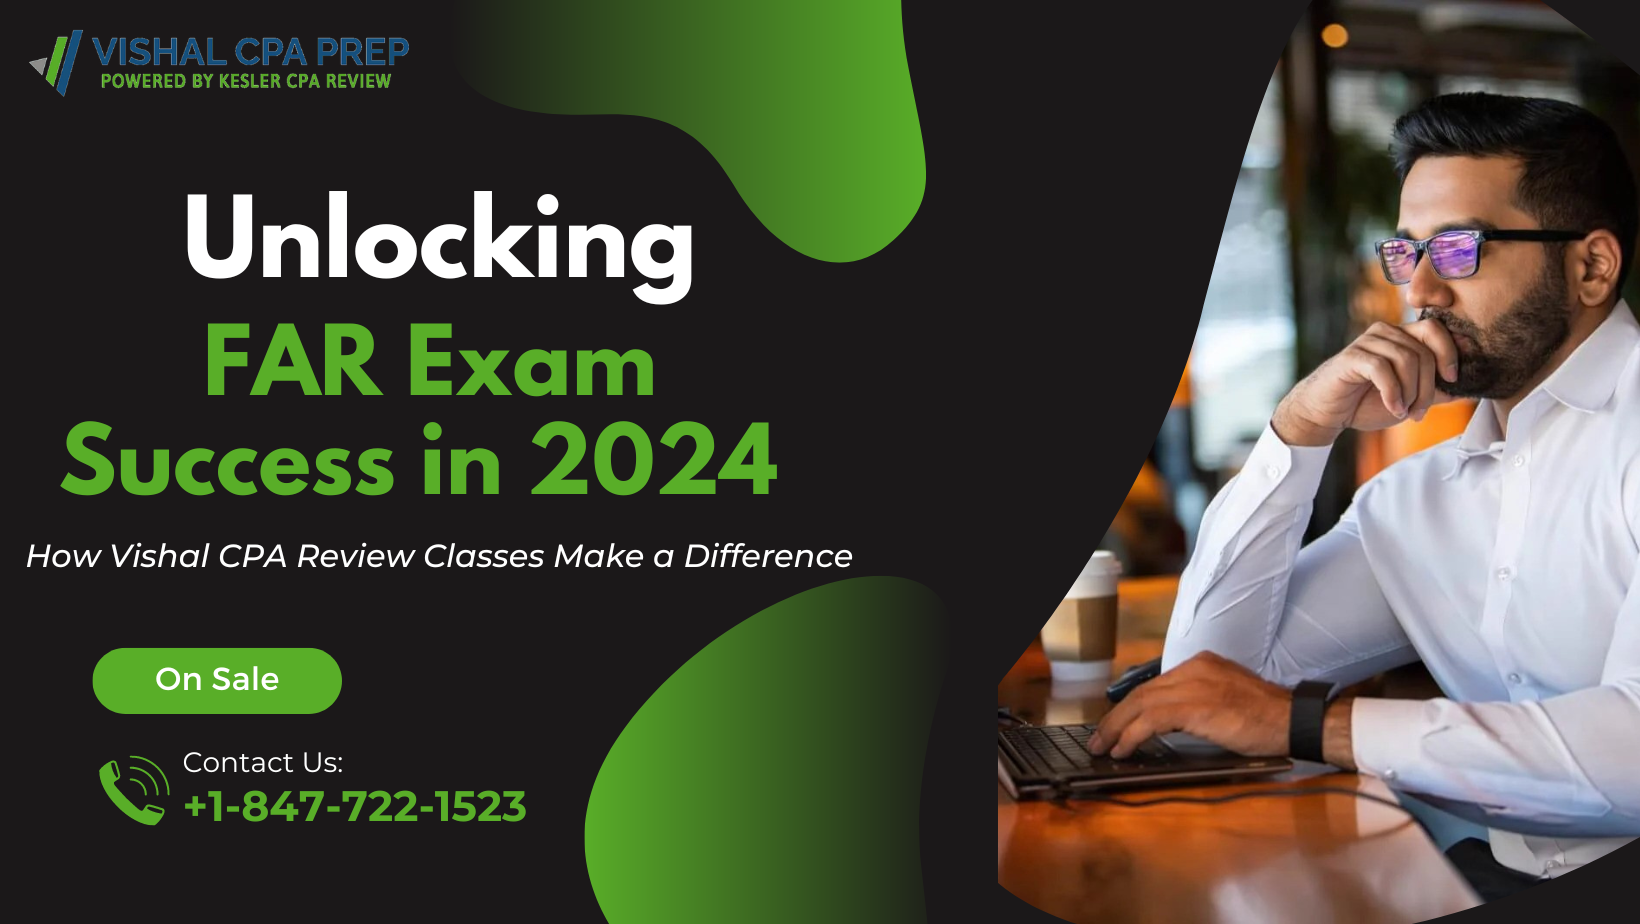 Unlocking FAR Exam Success in 2024: How Vishal CPA Review Classes Make a Difference